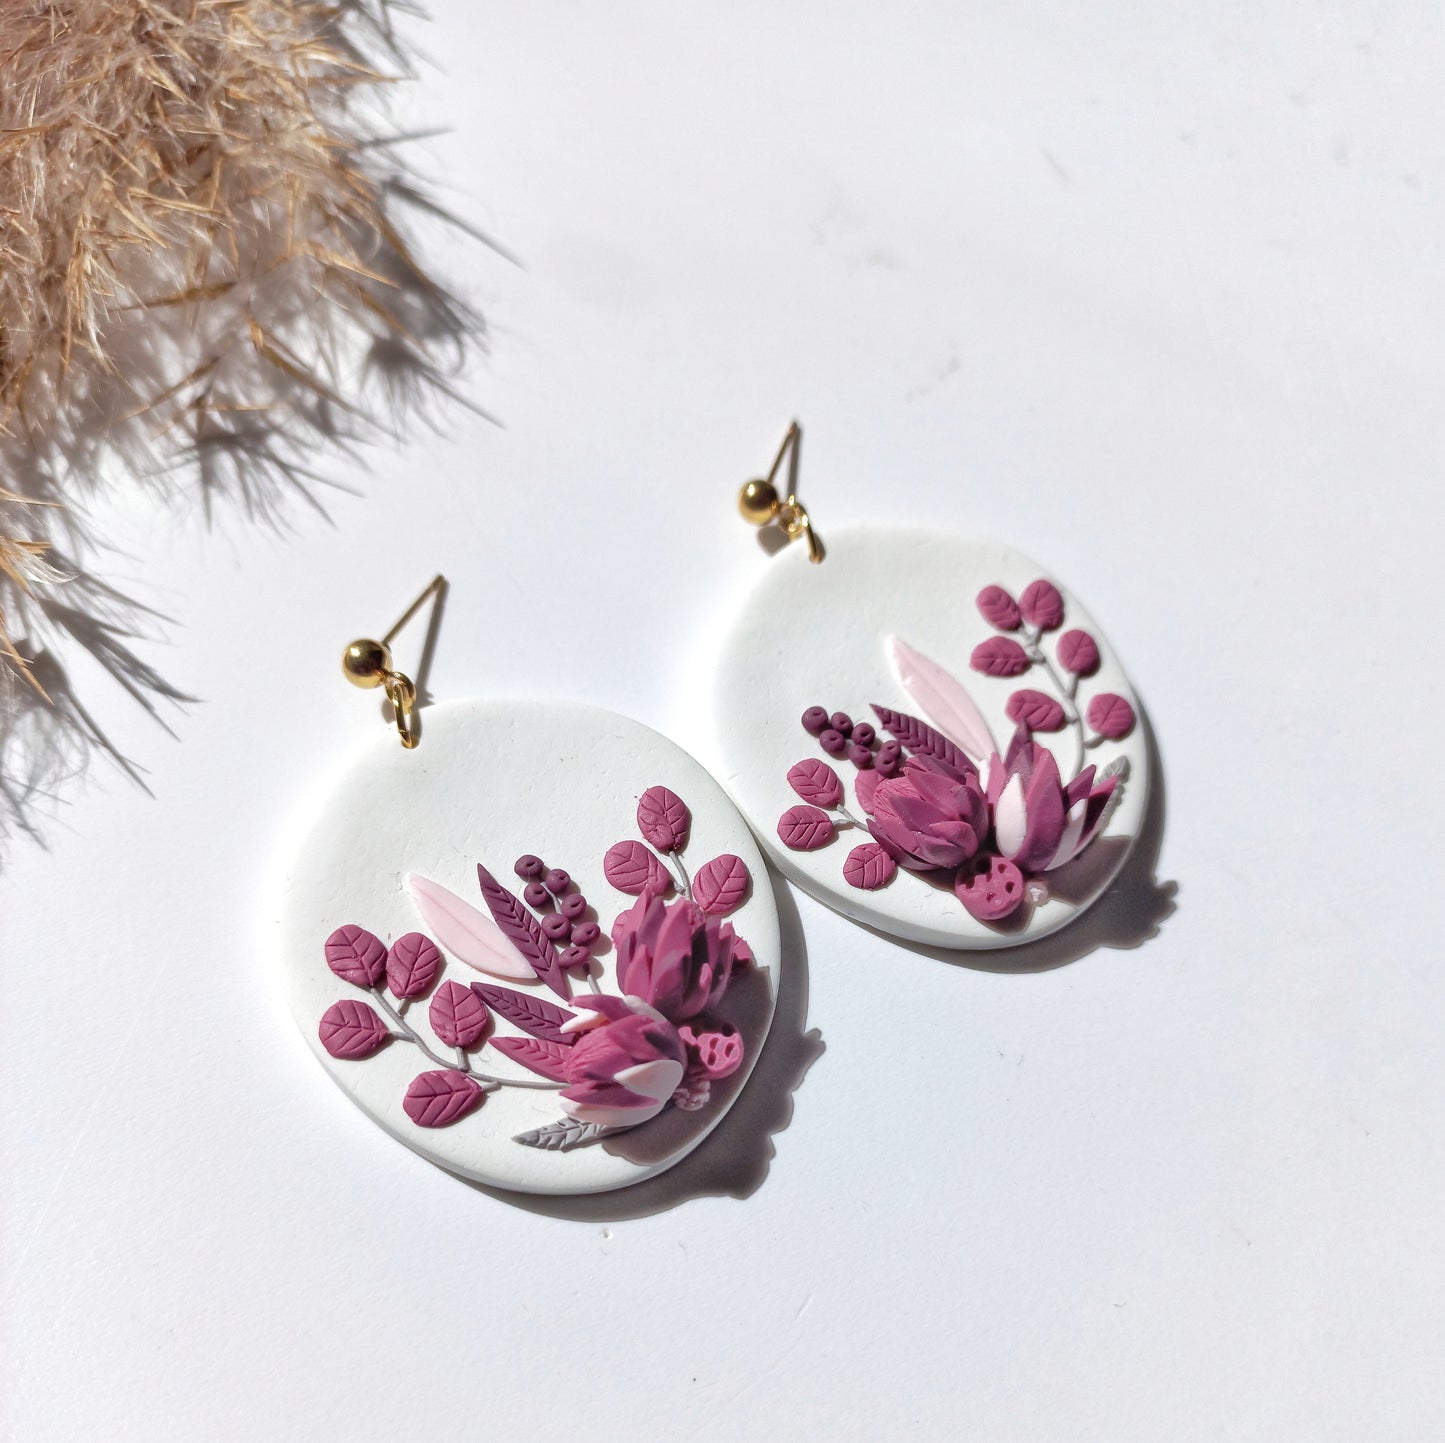 Chaska Protea - Large Circle Earring with stainless steel gold ball stud